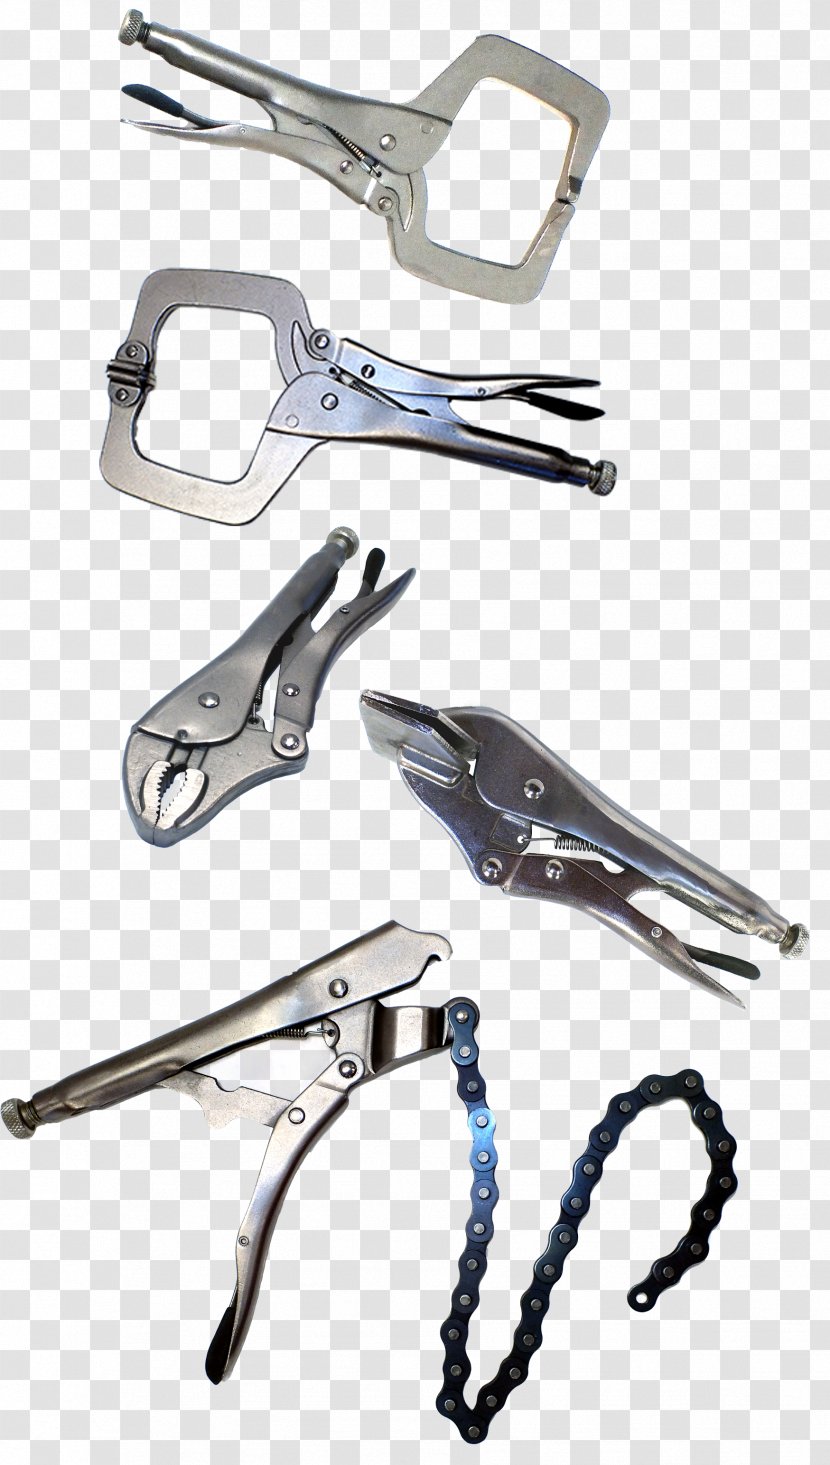 Locking Pliers Multi-function Tools & Knives Clamp - Metalworking Transparent PNG